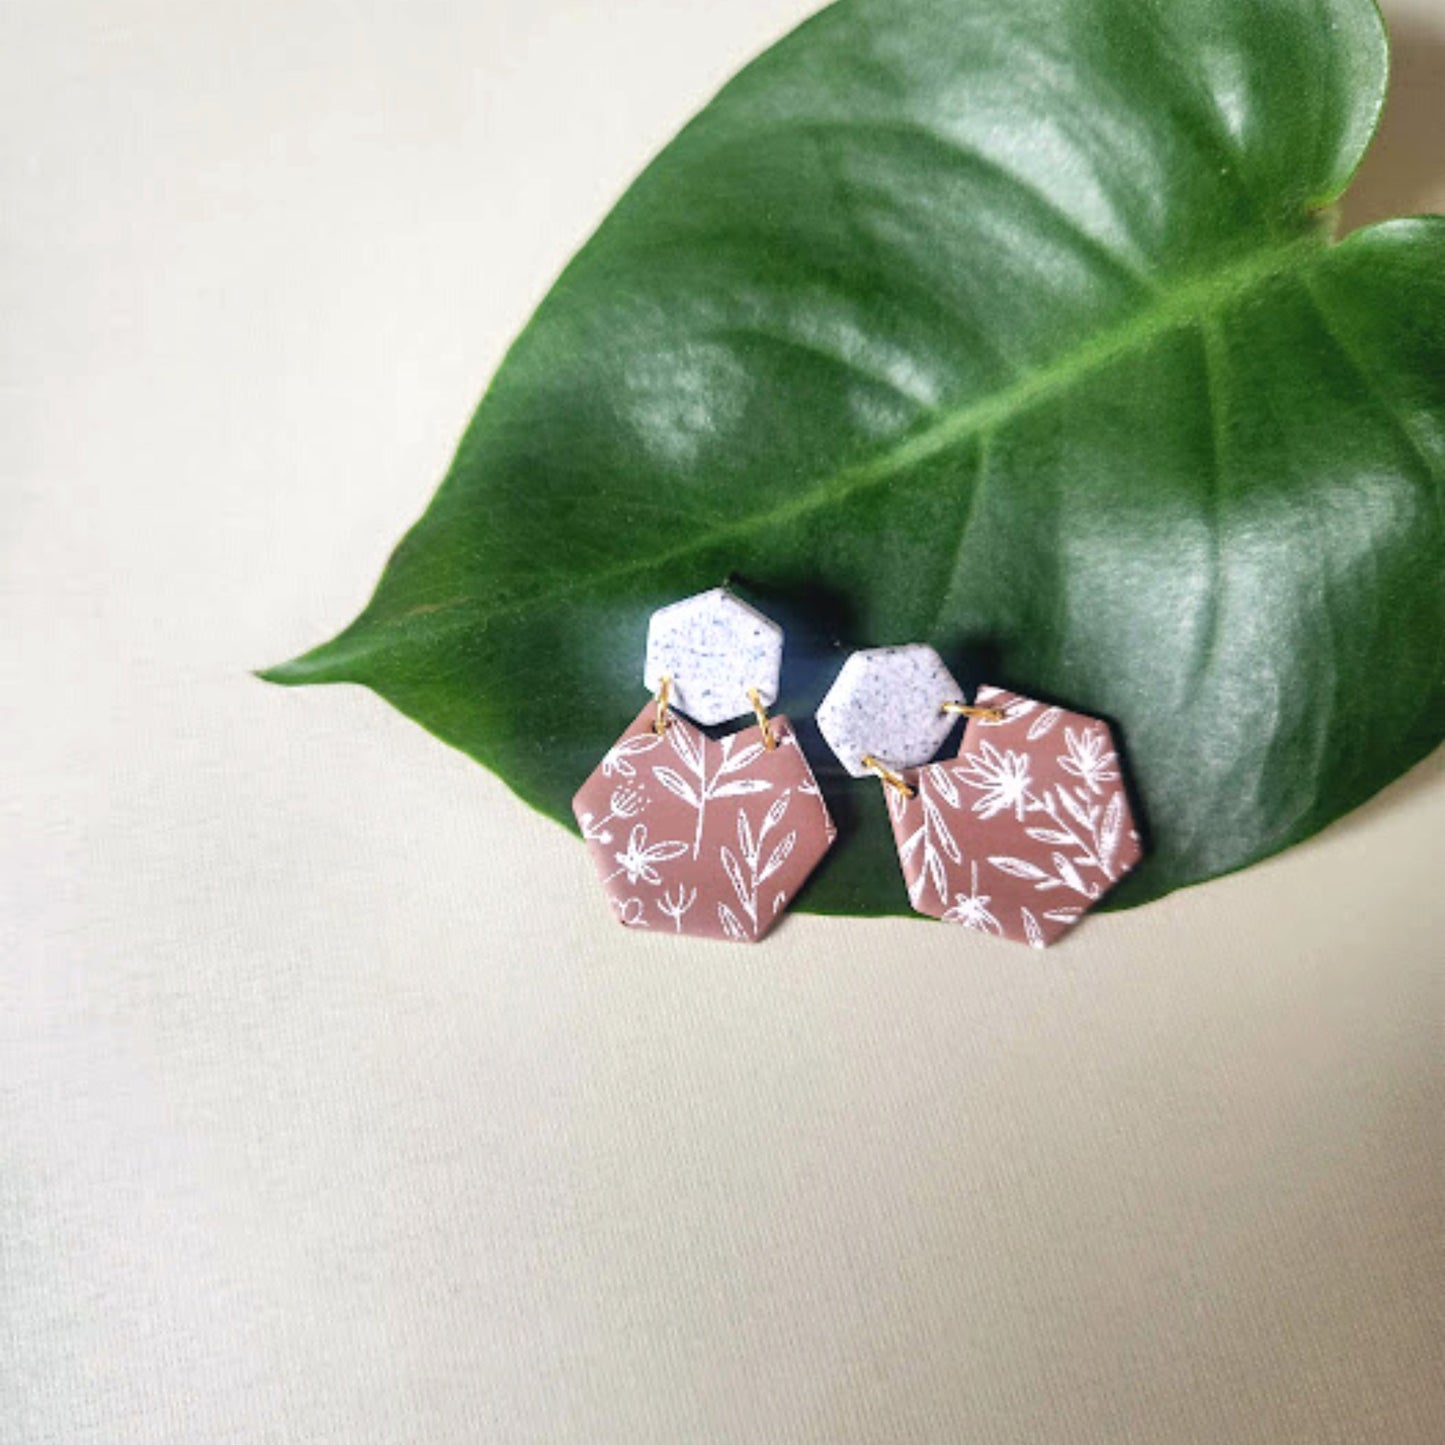 The Rose Color Block Hexagon Clay Earrings in Mauve and Gray